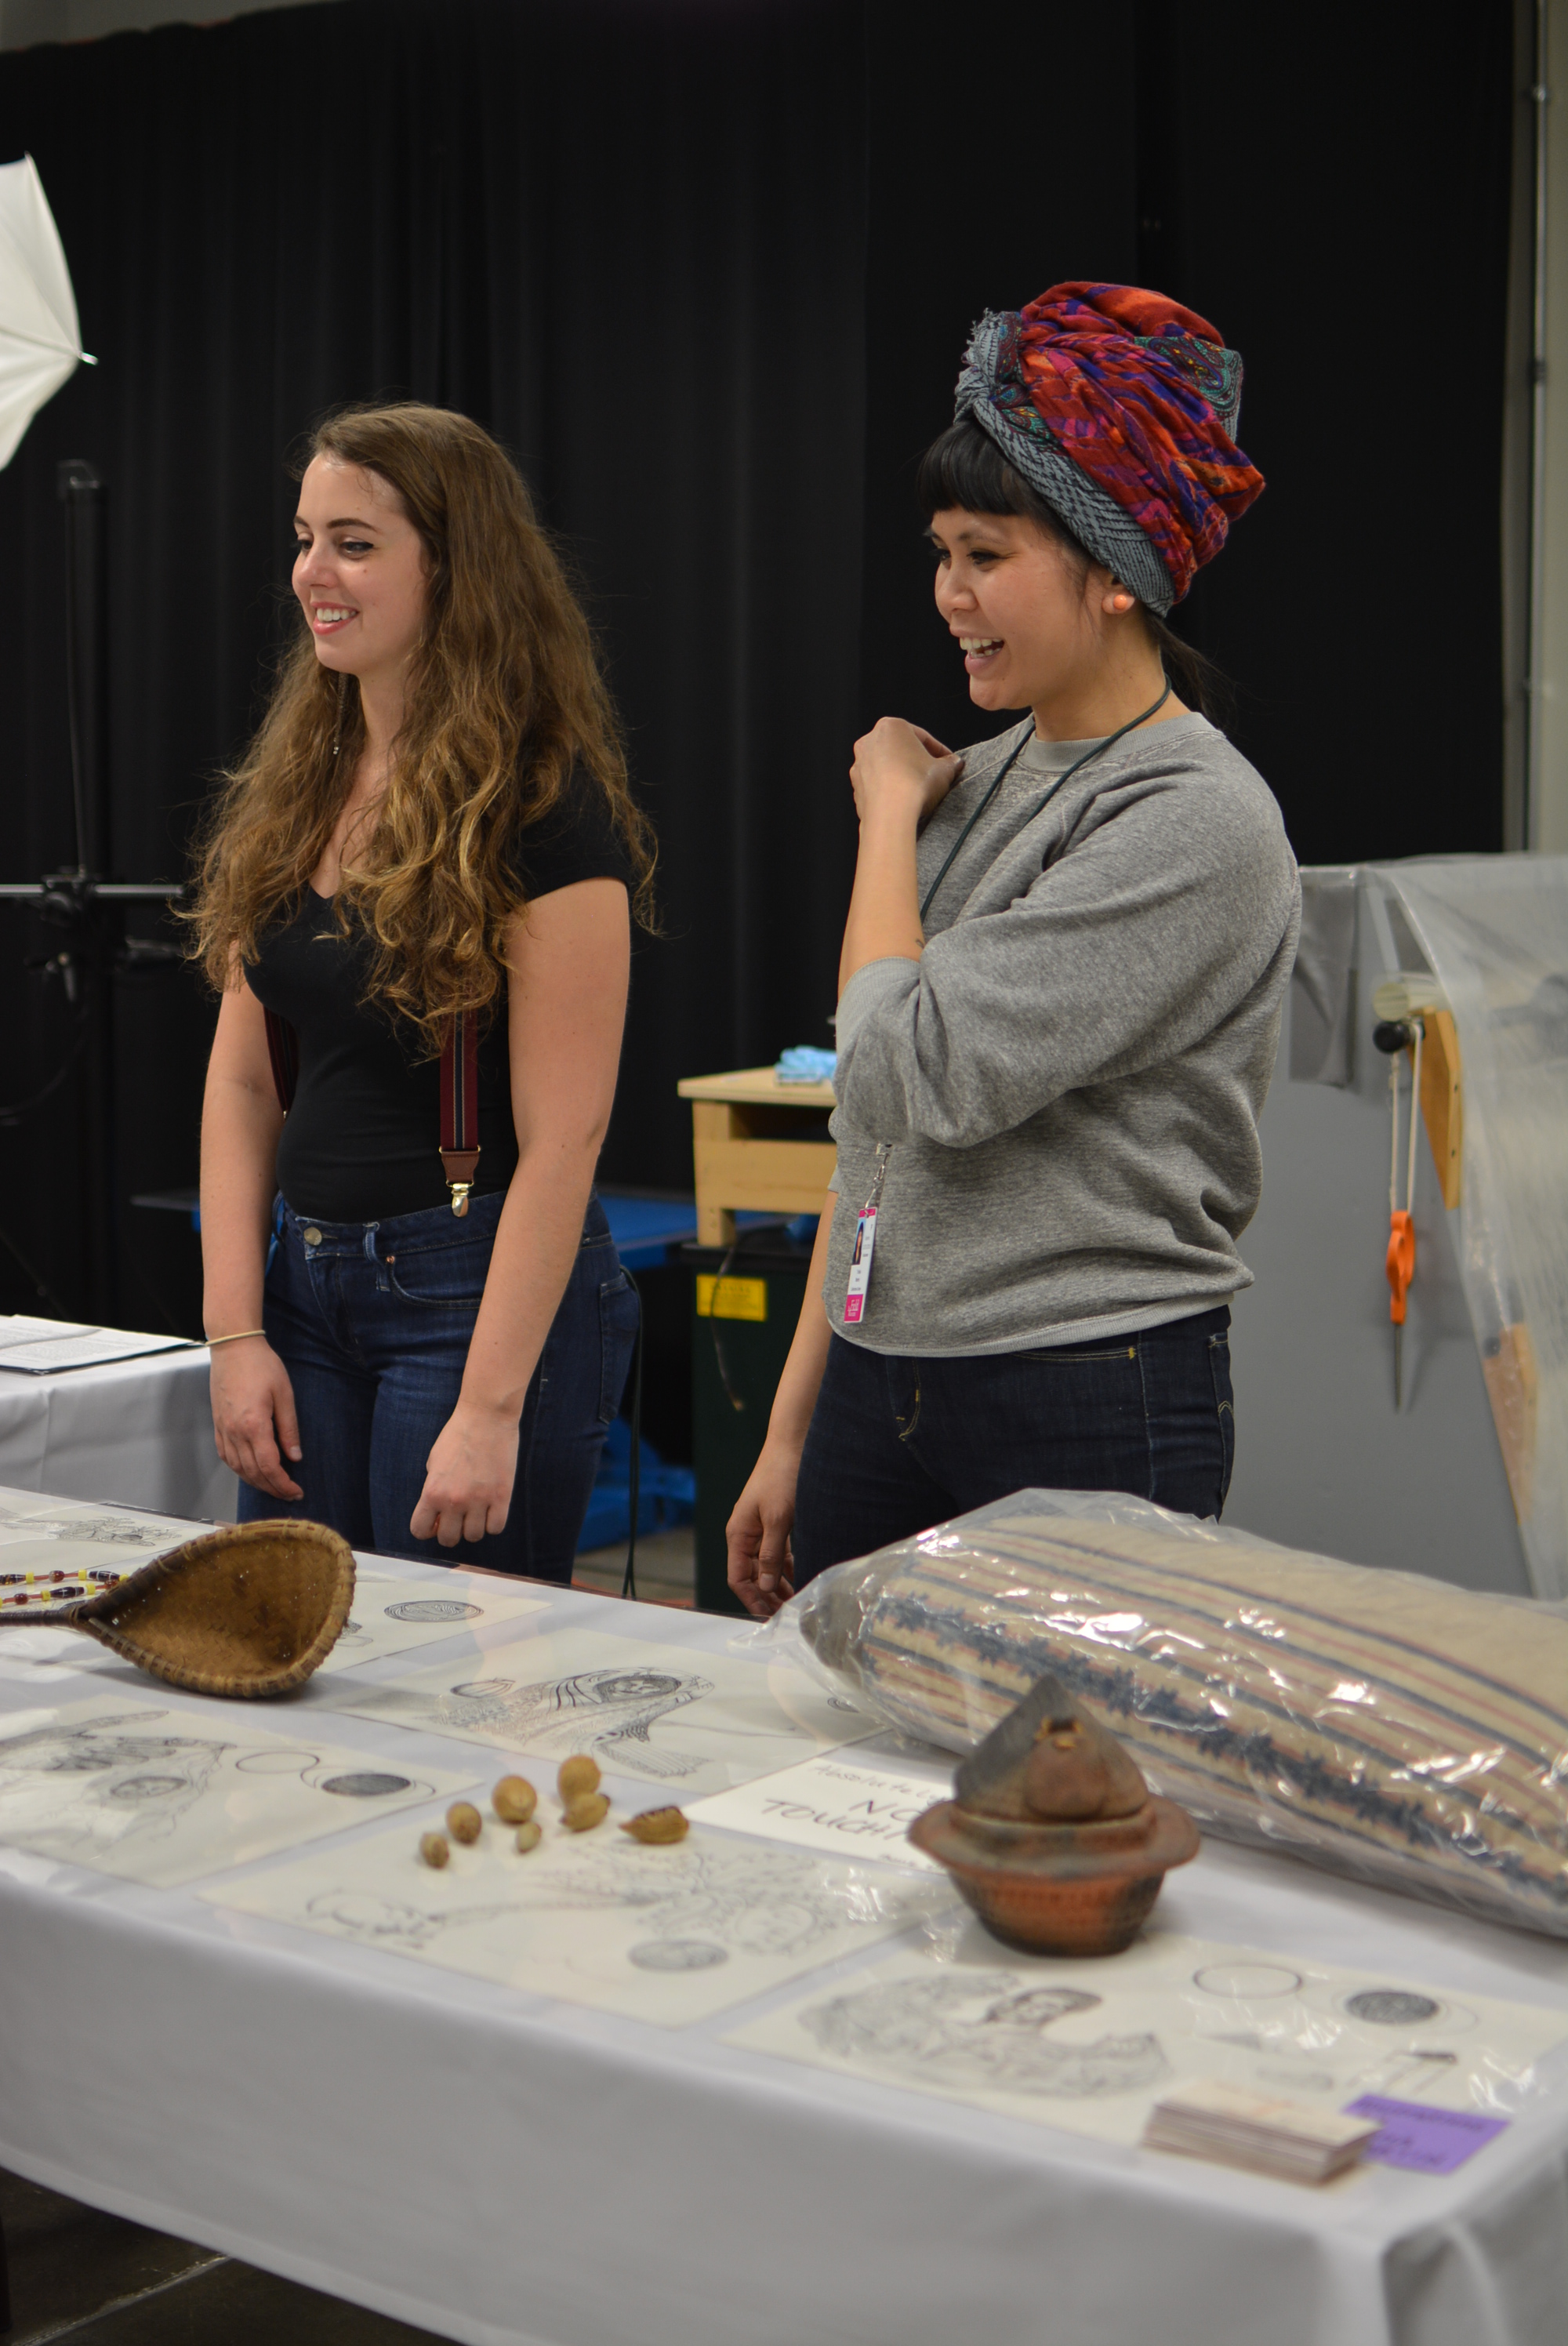 Cassie and Trisha interacting with guests during their presentation. (c) Field Museum of Natural History - CC BY-NC 4.0